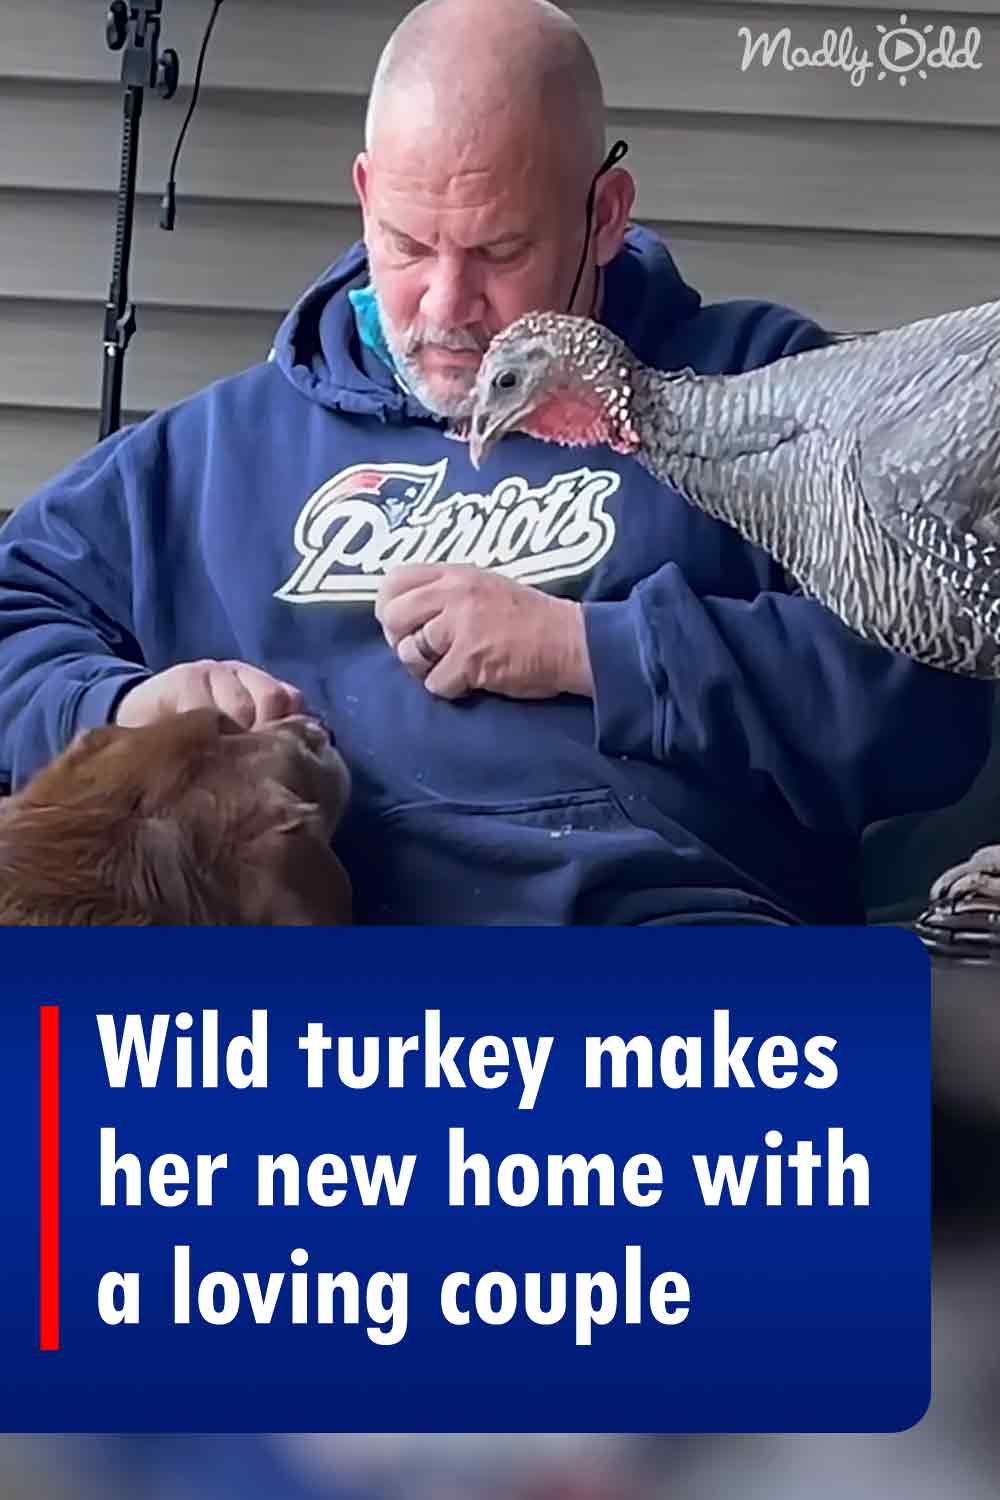 Wild turkey makes her new home with a loving couple